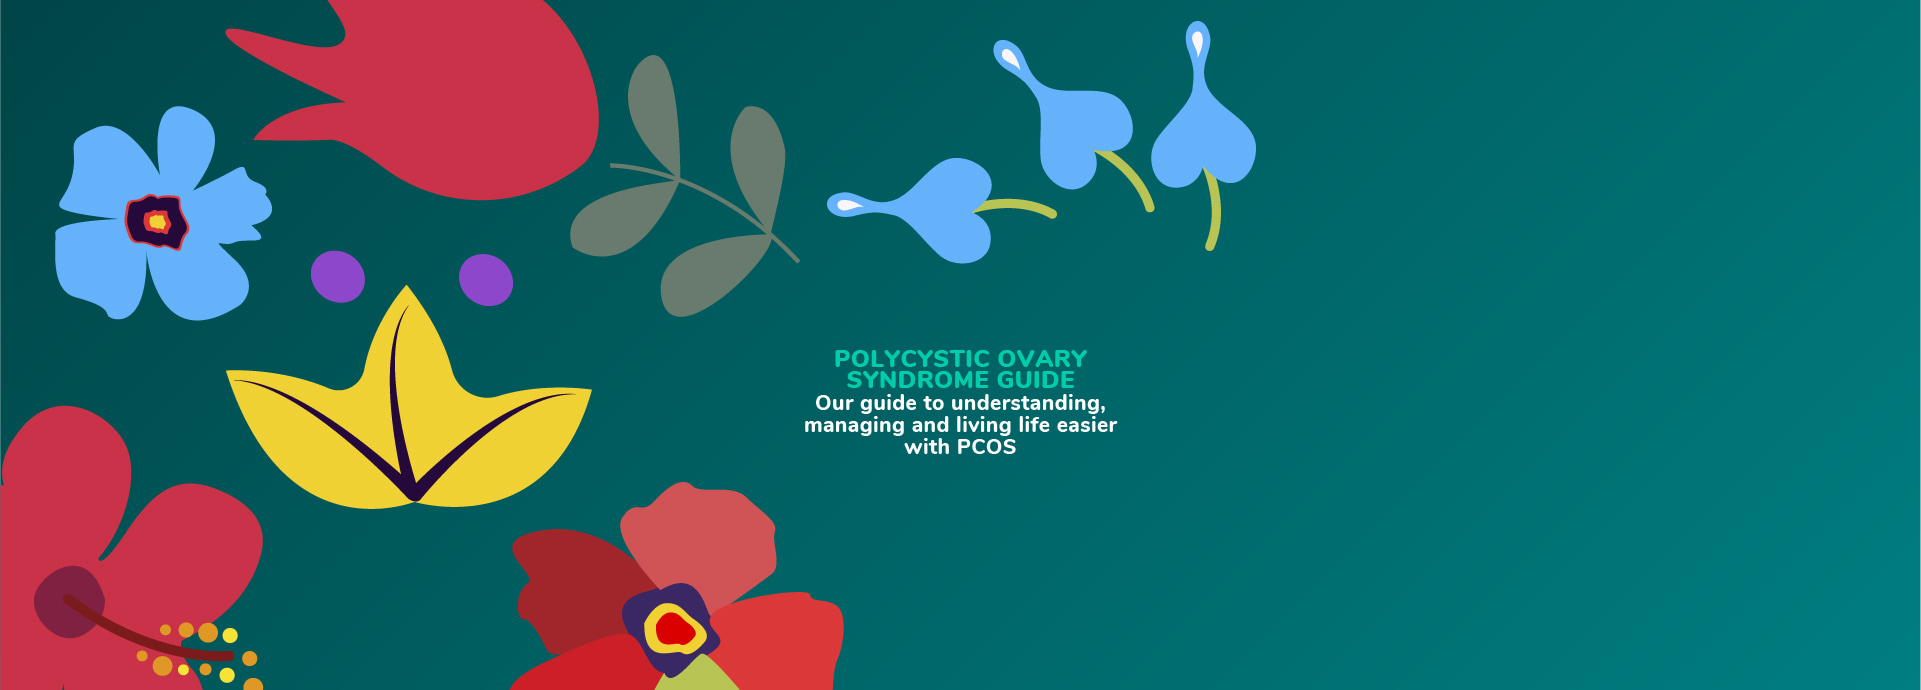 Polycystic Ovary Syndrome (PCOS) Guide